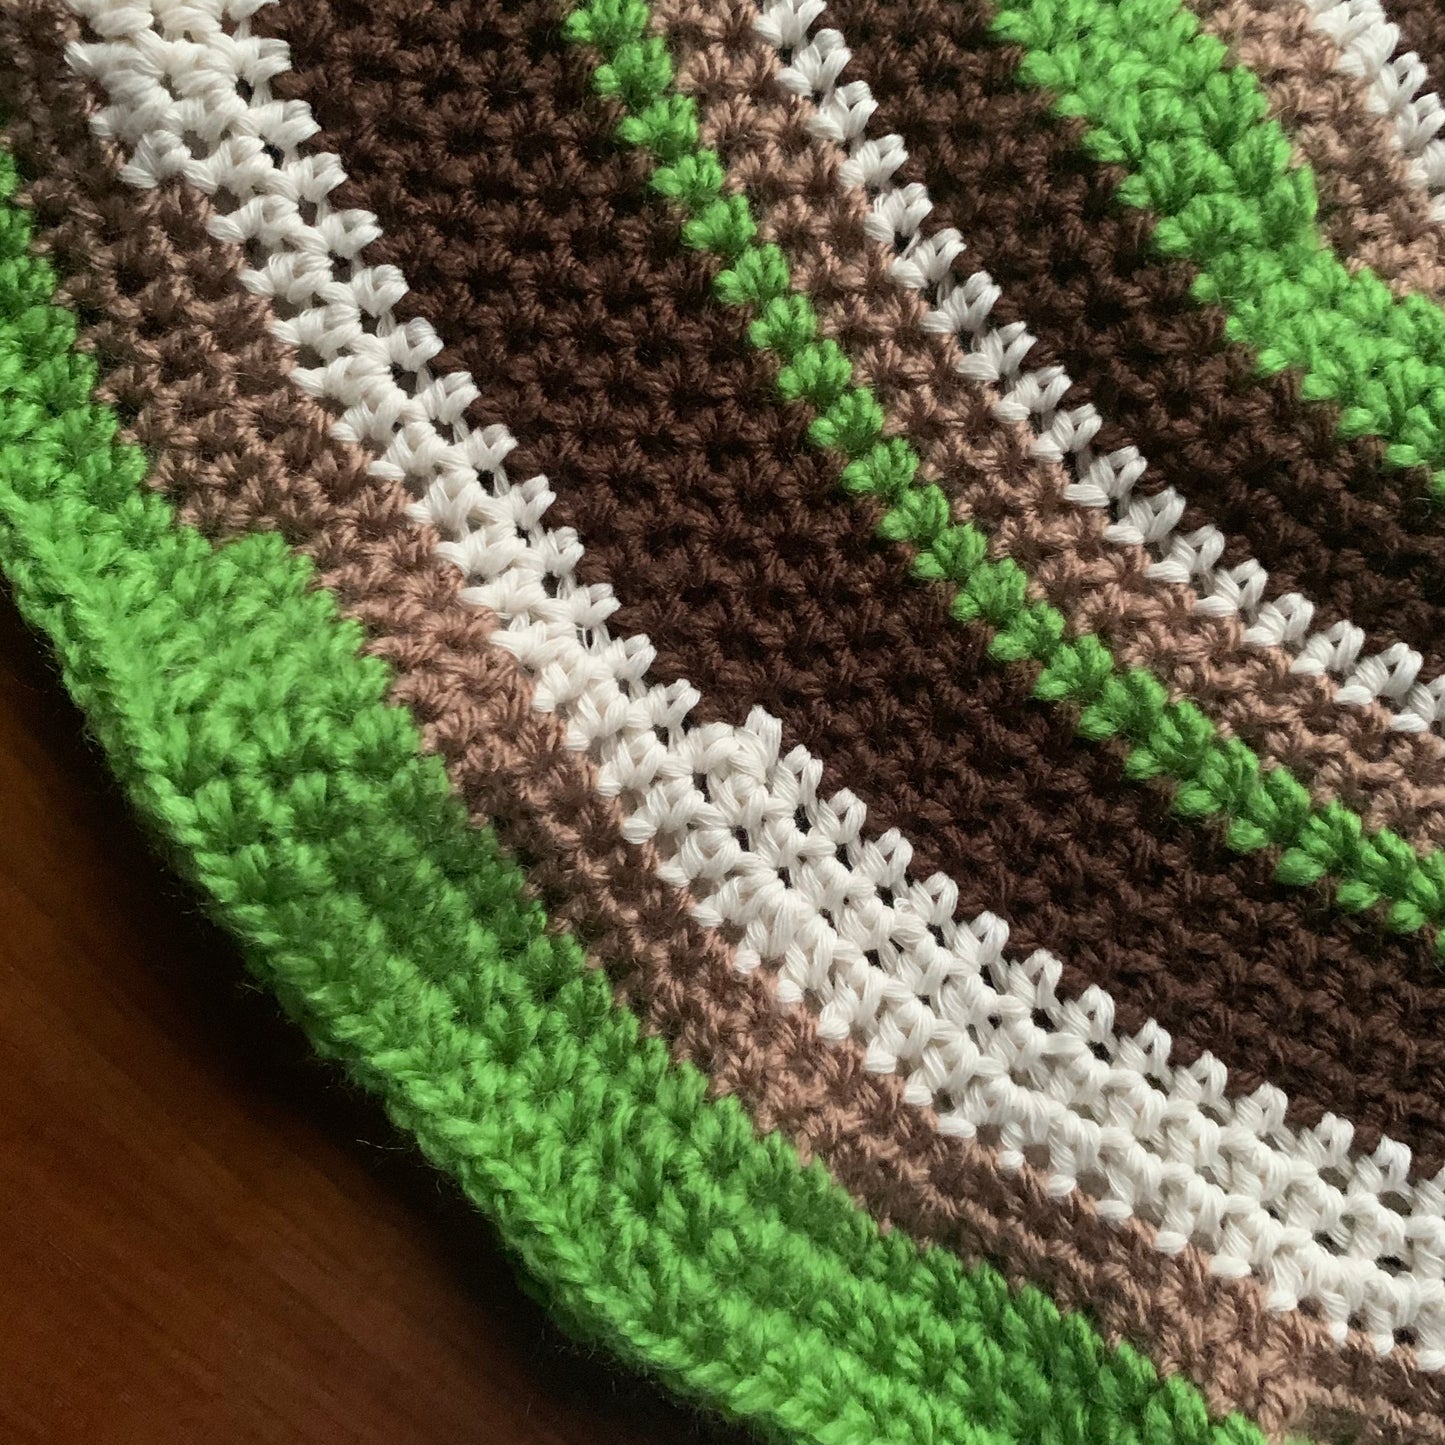 Handmade striped crochet bucket hat in green, brown and off white